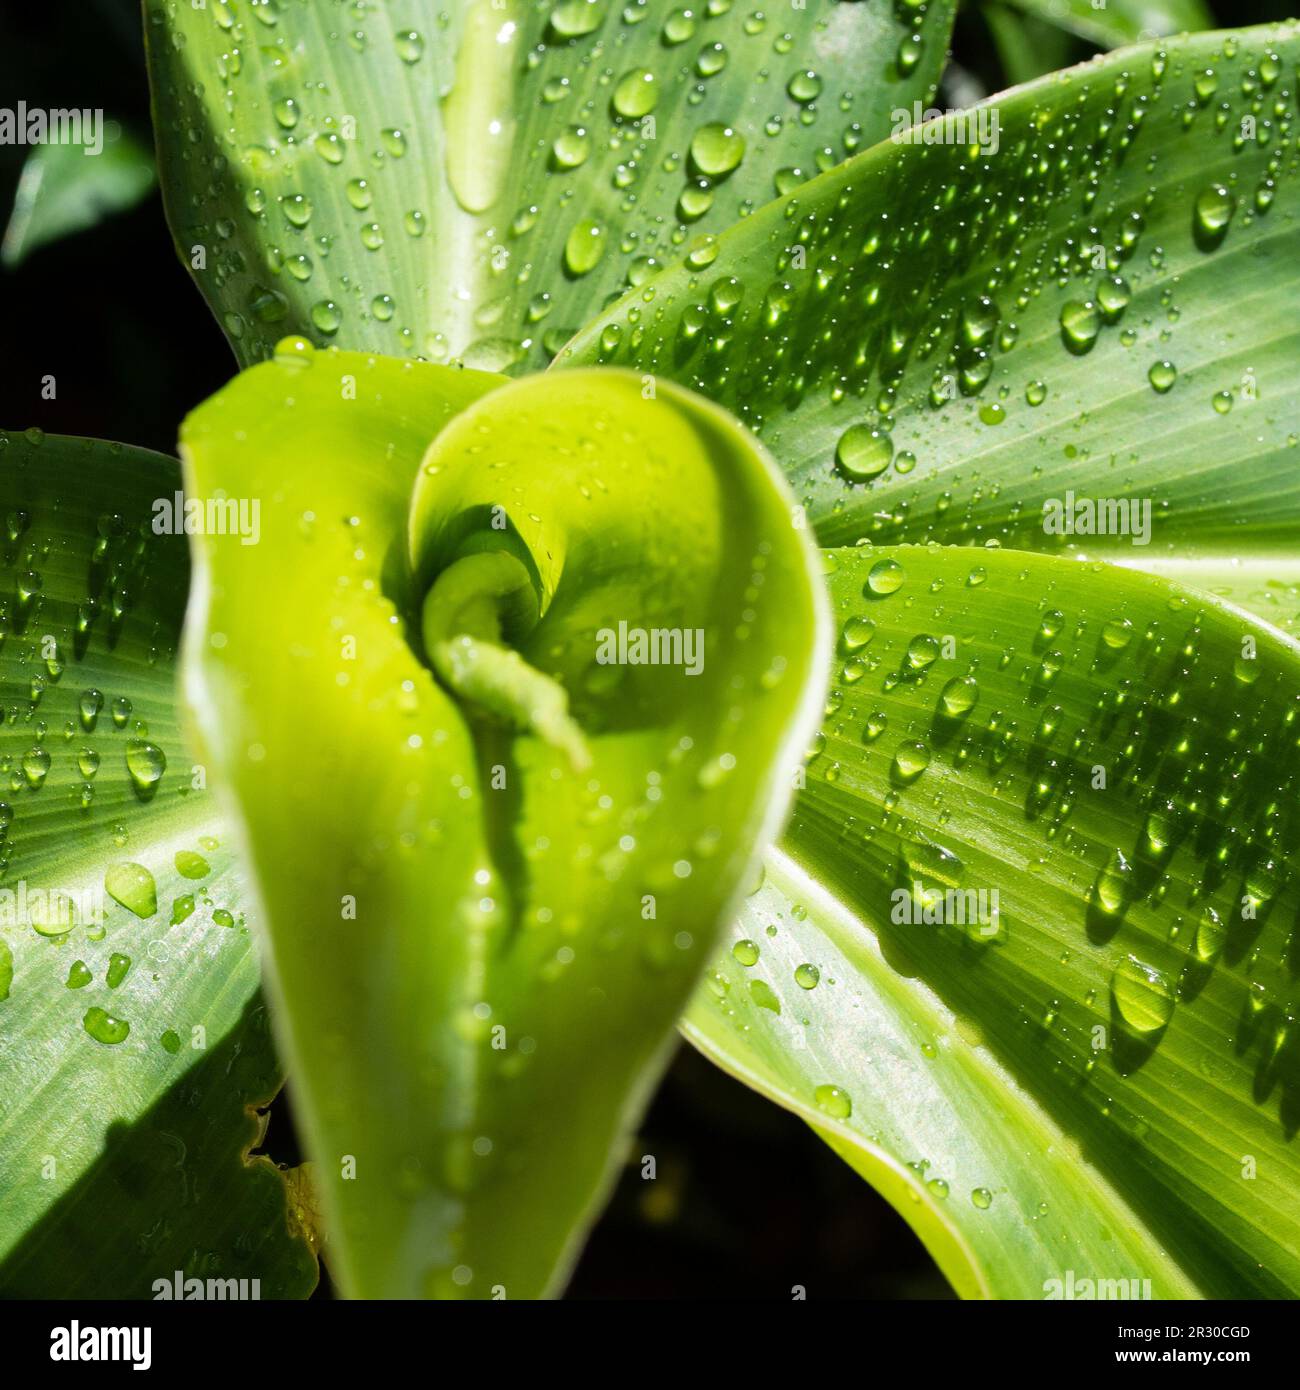 The Green leaves of the Spiral ginger plant spiral around a central stem, fresh and covered in water droplets Stock Photo